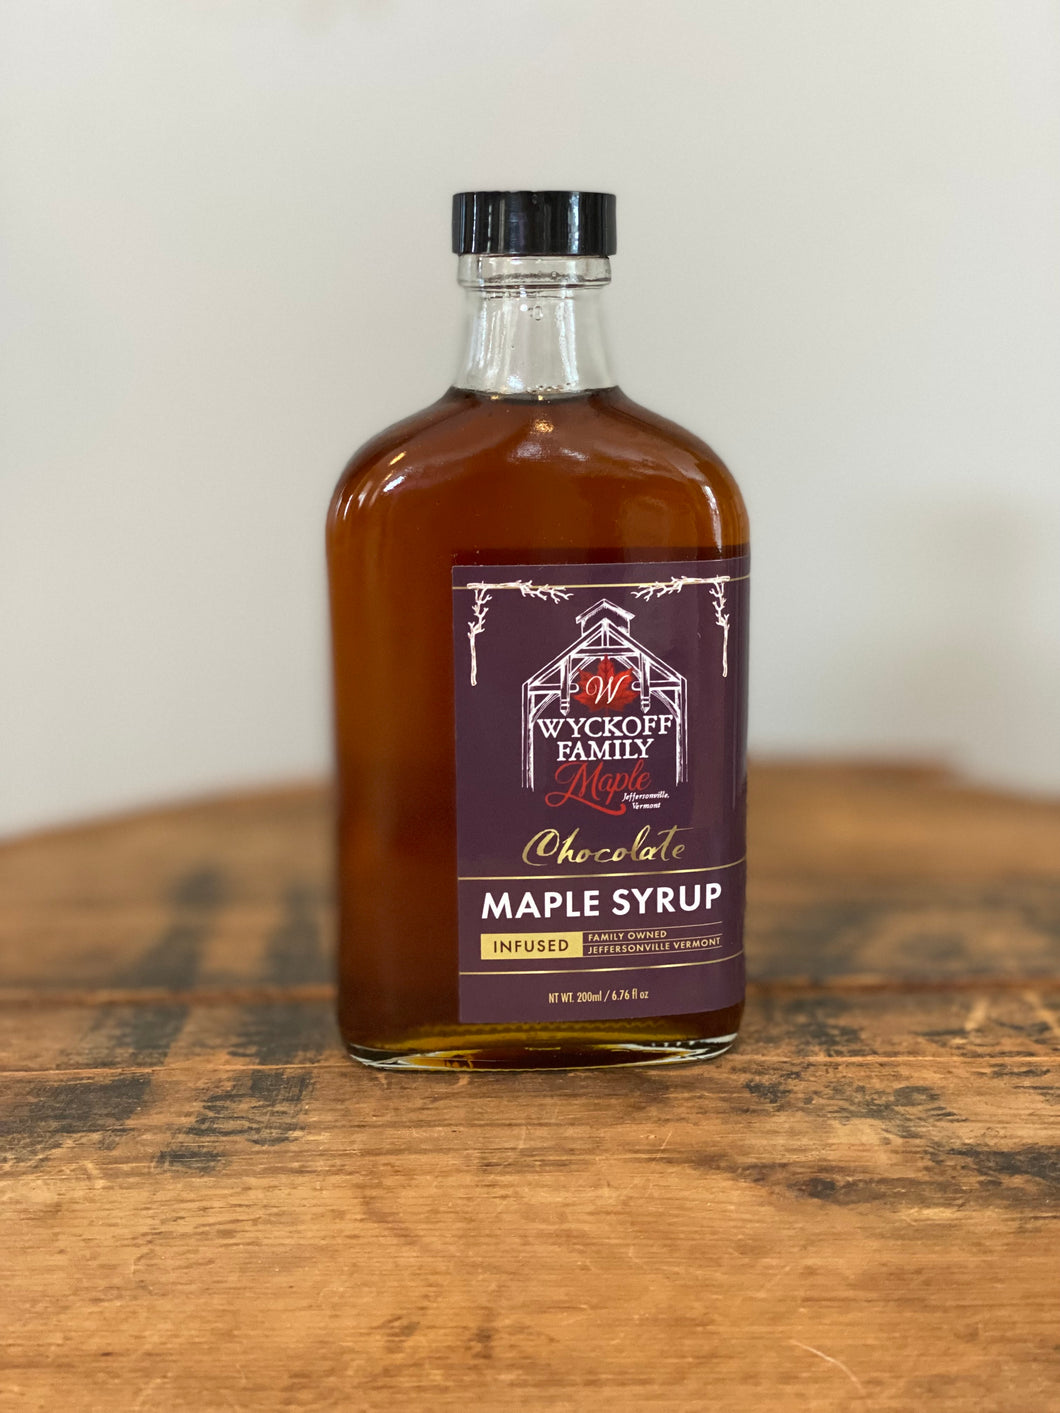 Chocolate Infused Maple Syrup